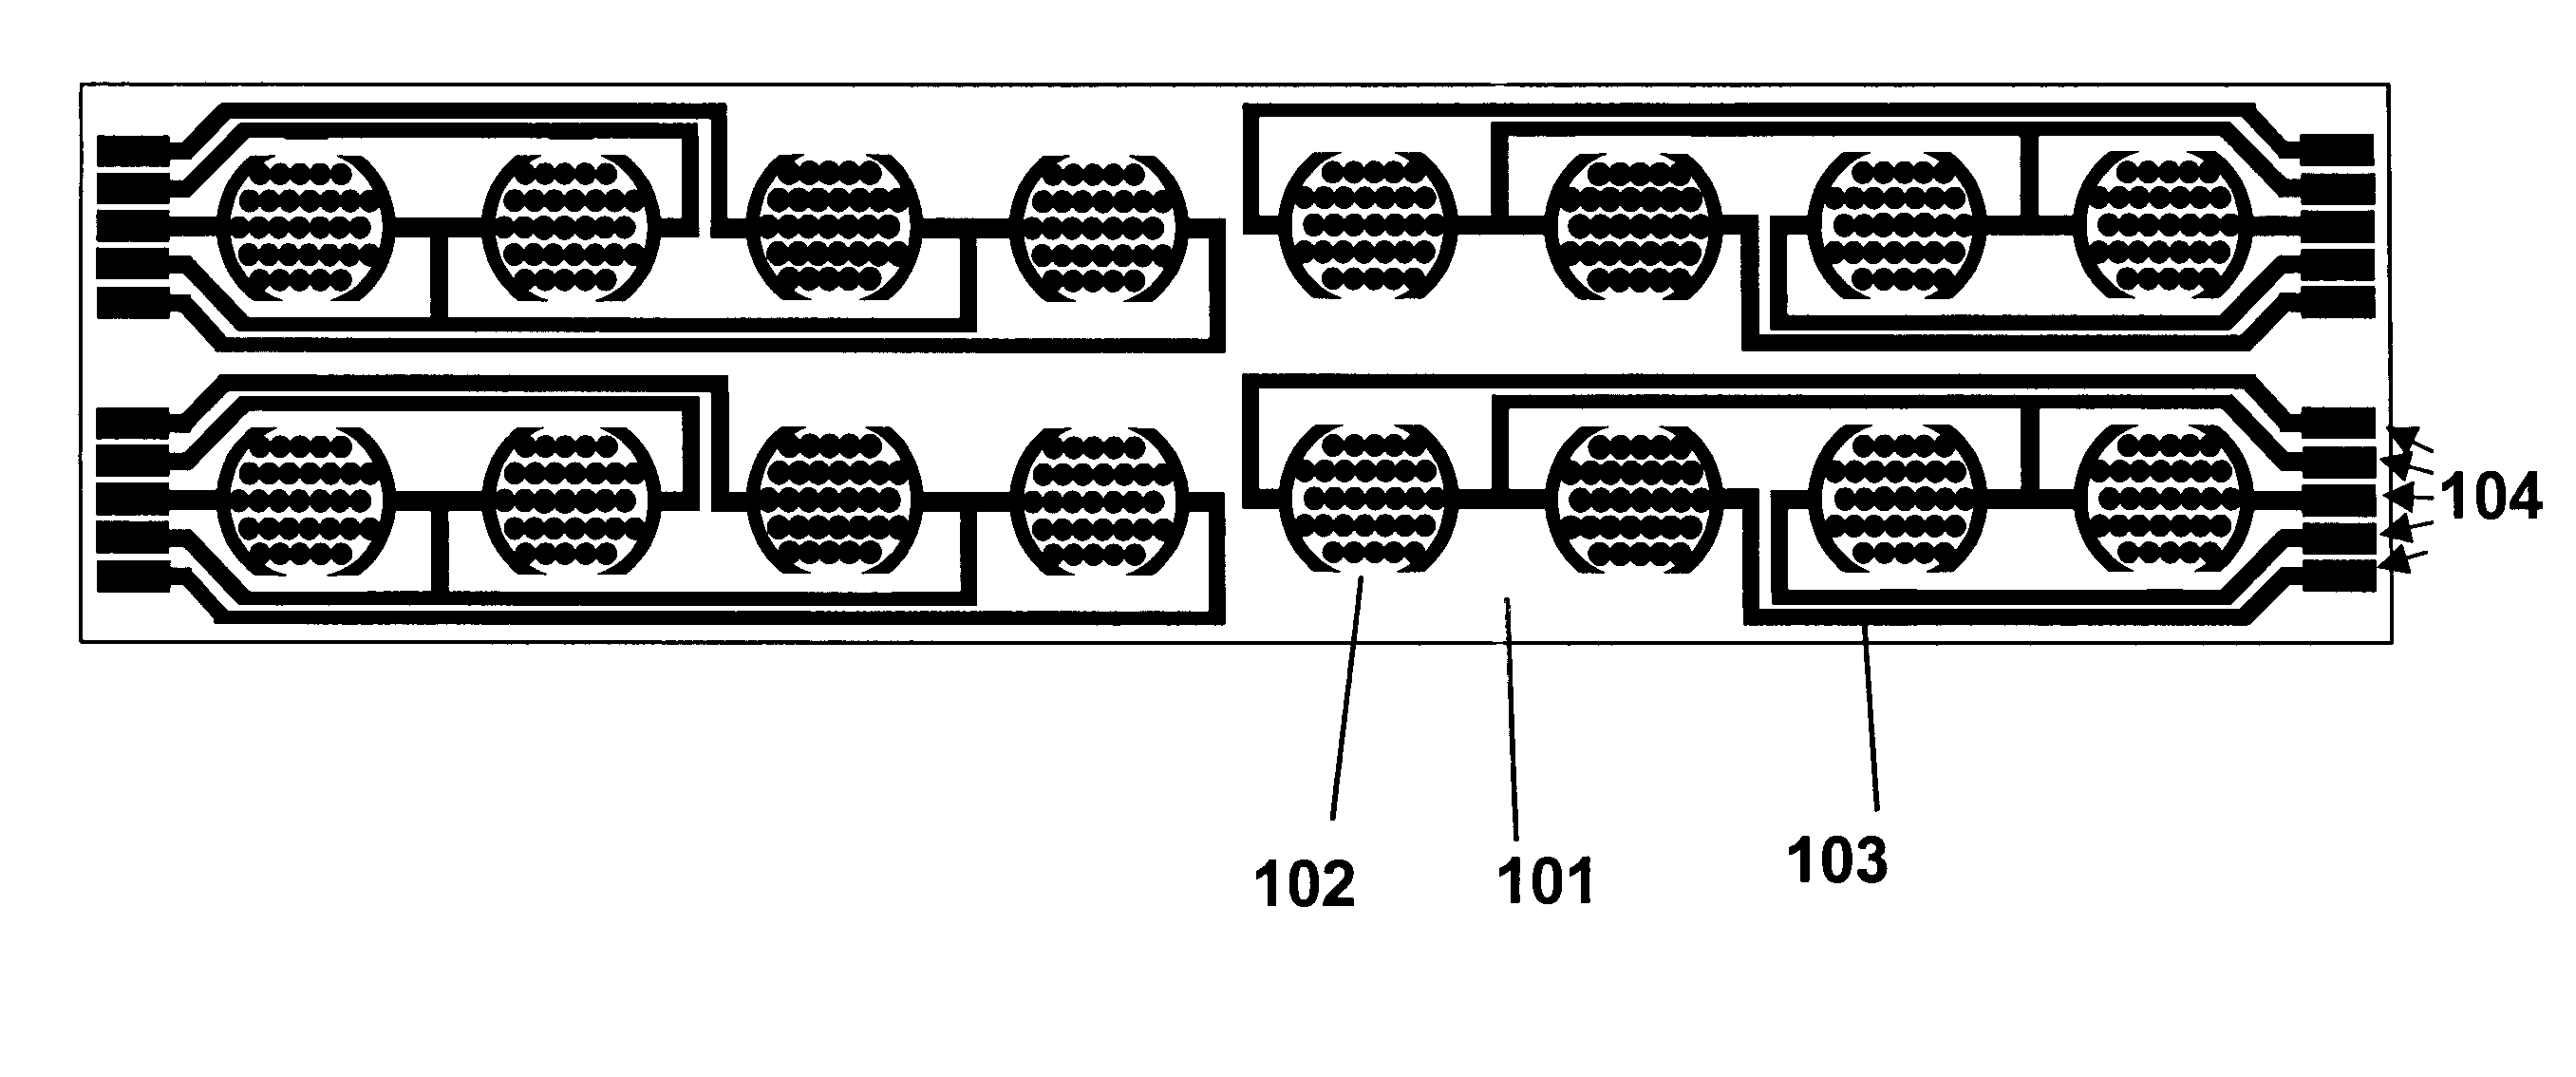 Real time electronic cell sensing system and applications for cytotoxicity profiling and compound assays